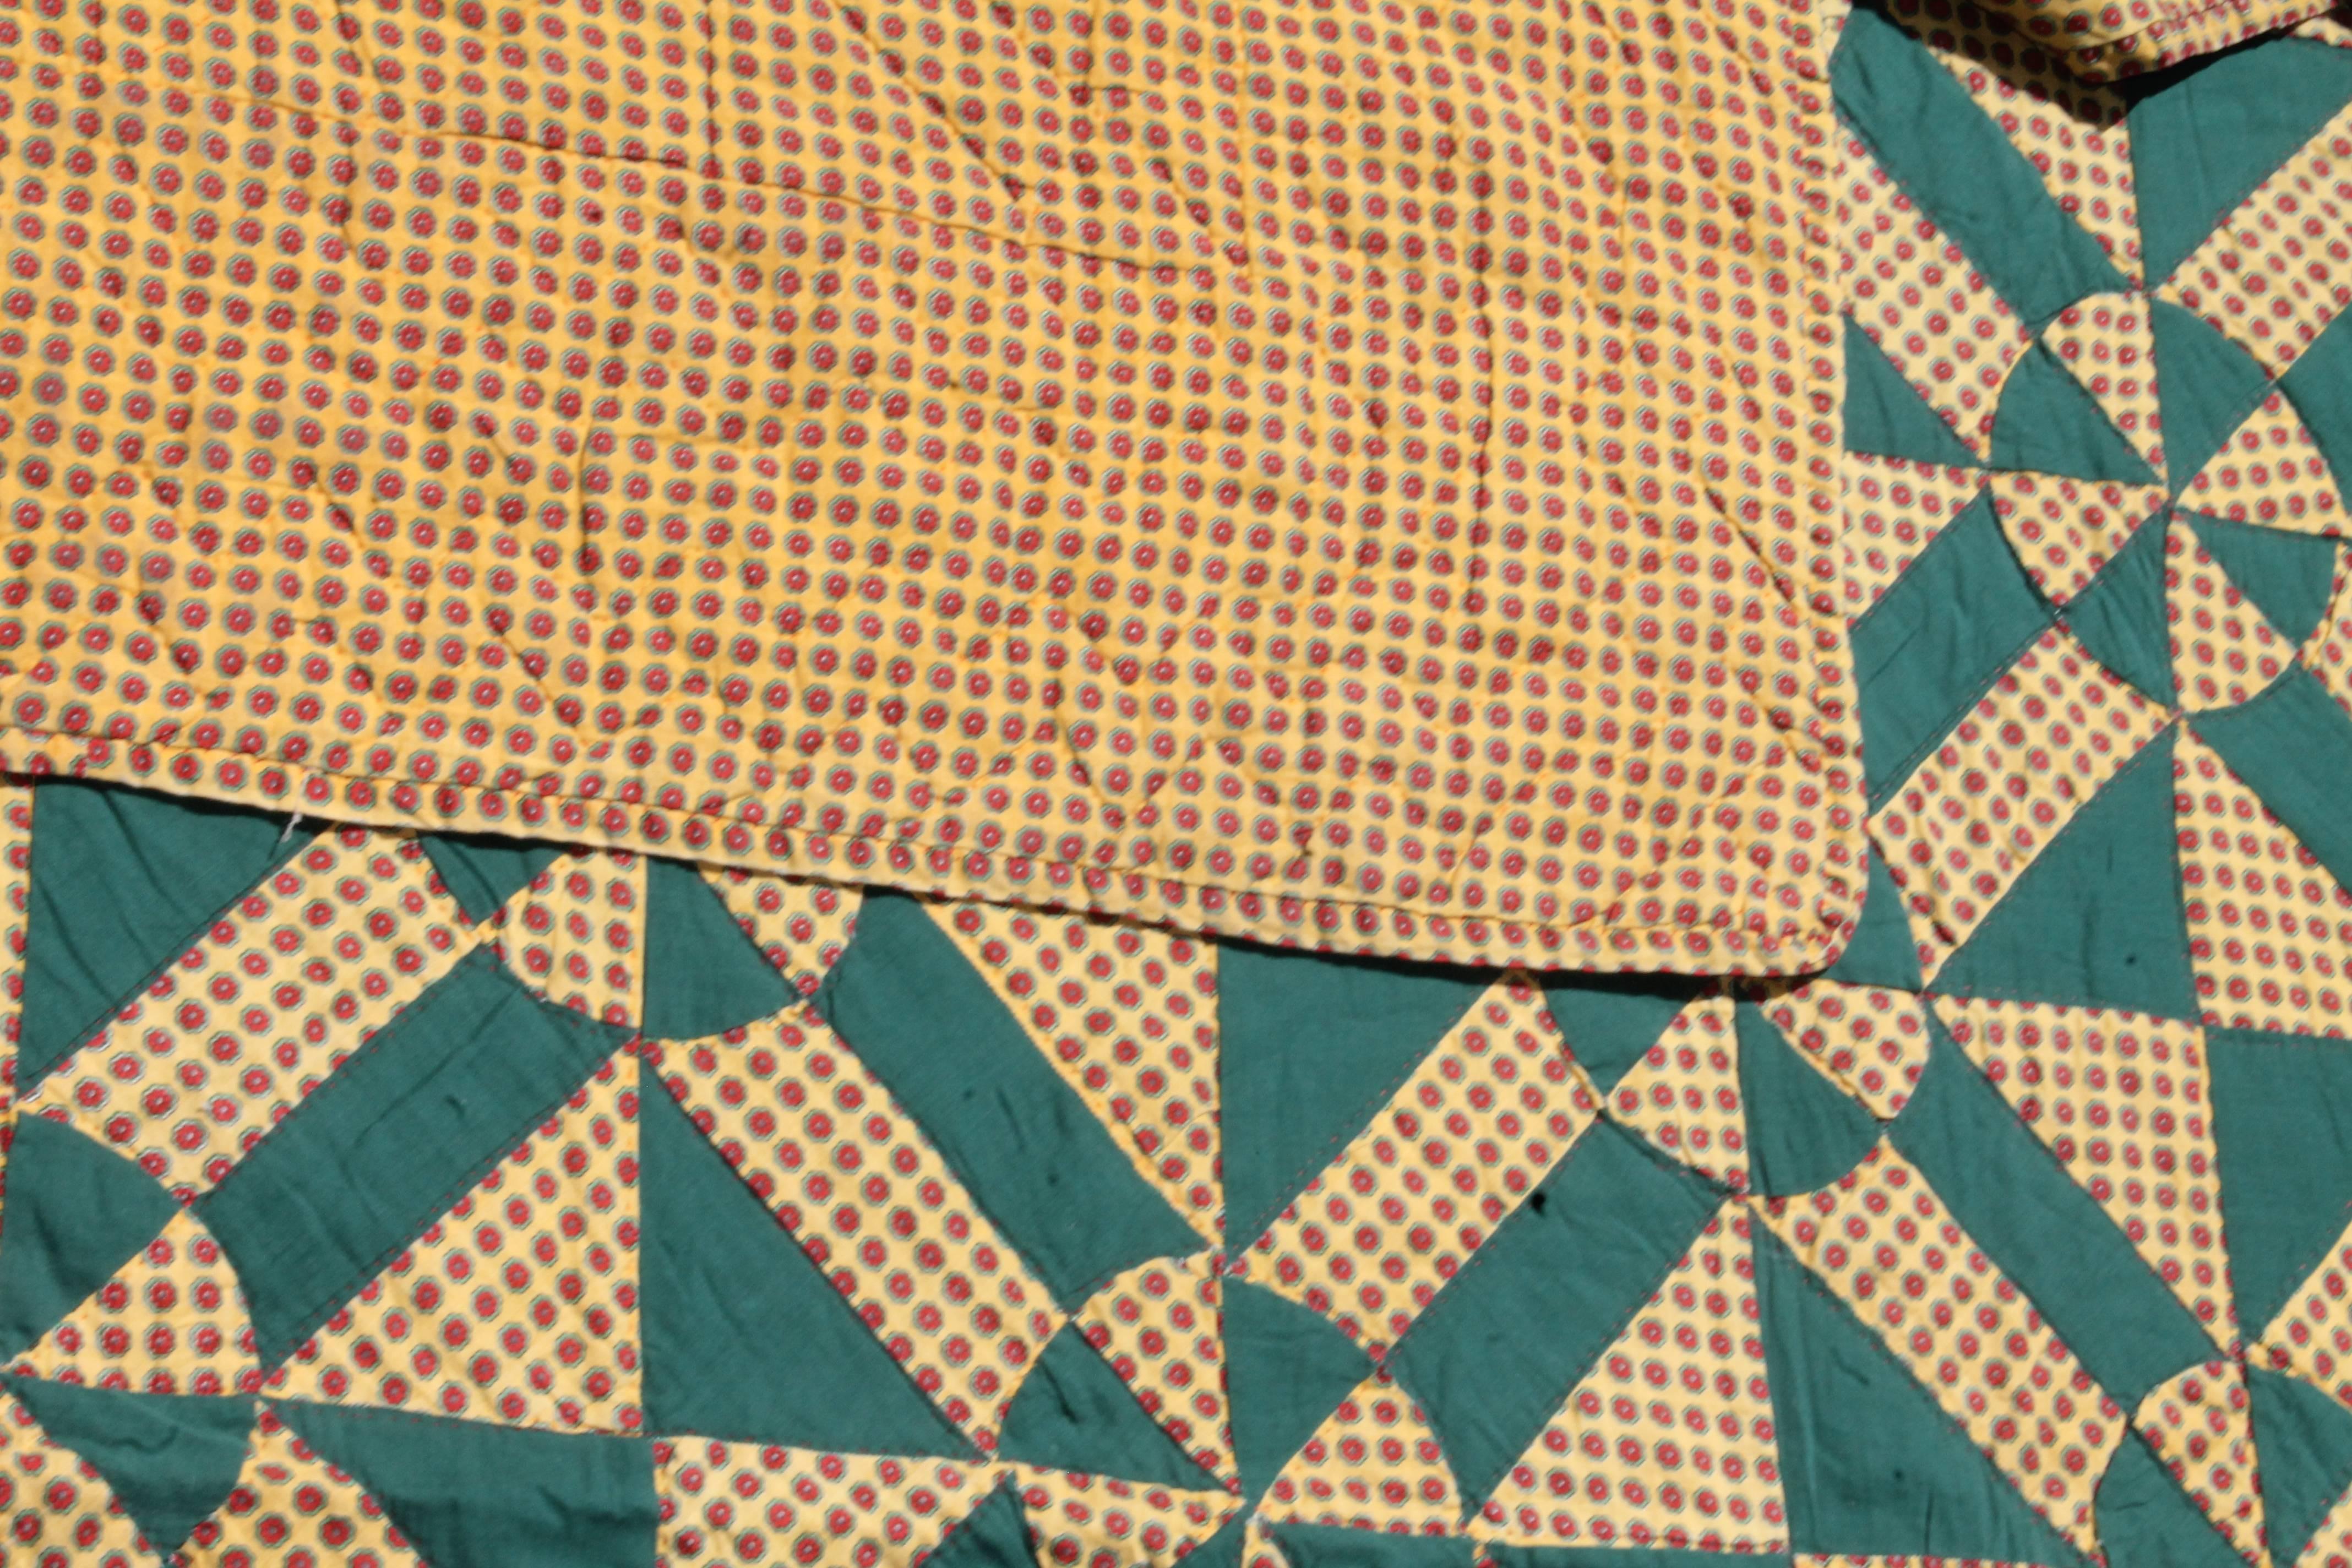 Hand-Crafted 19th Century, Geometric Pinwheels Green and Tan Quilt